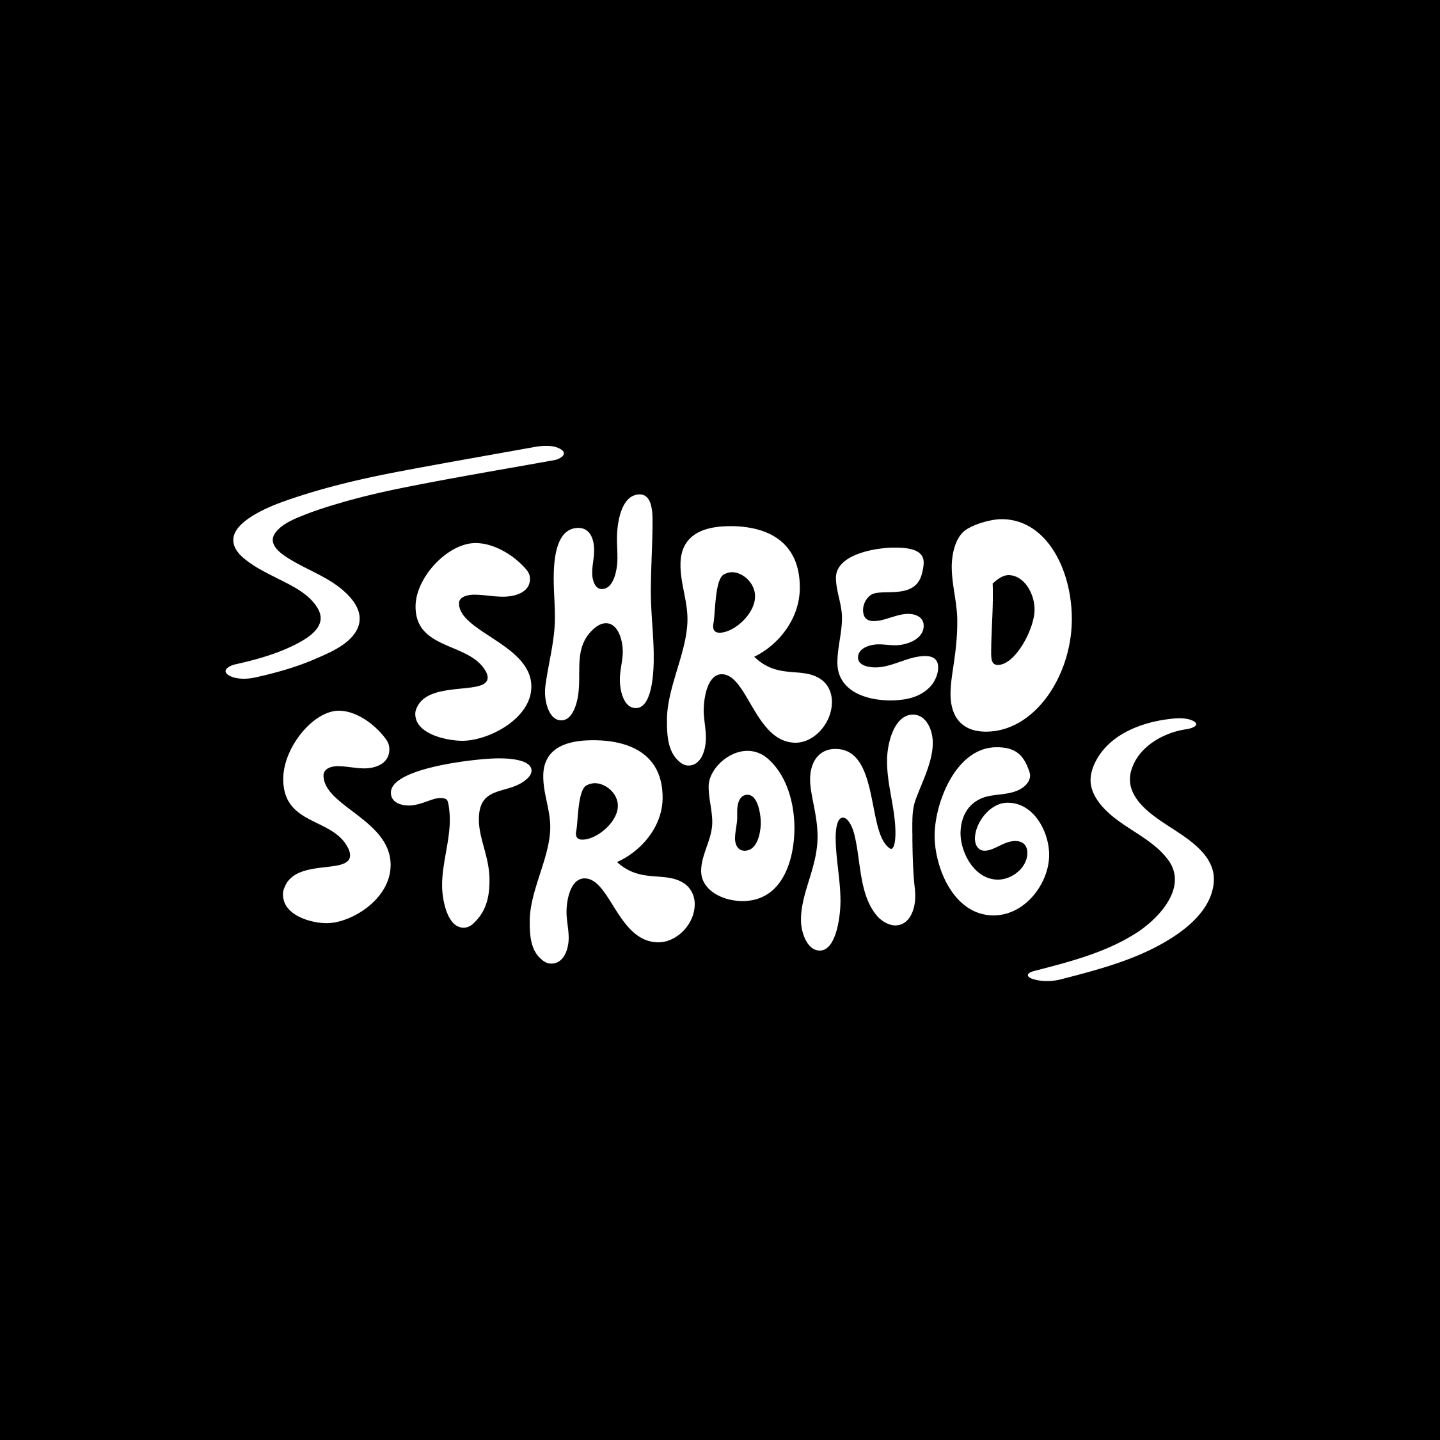 Kristyn was looking for an updated brand design for @shredstrong that matched her chill personality and laid-back training style, while conveying the stoke factor of being a snowboarder training other snowboarders! 

Our brand redesign started with h